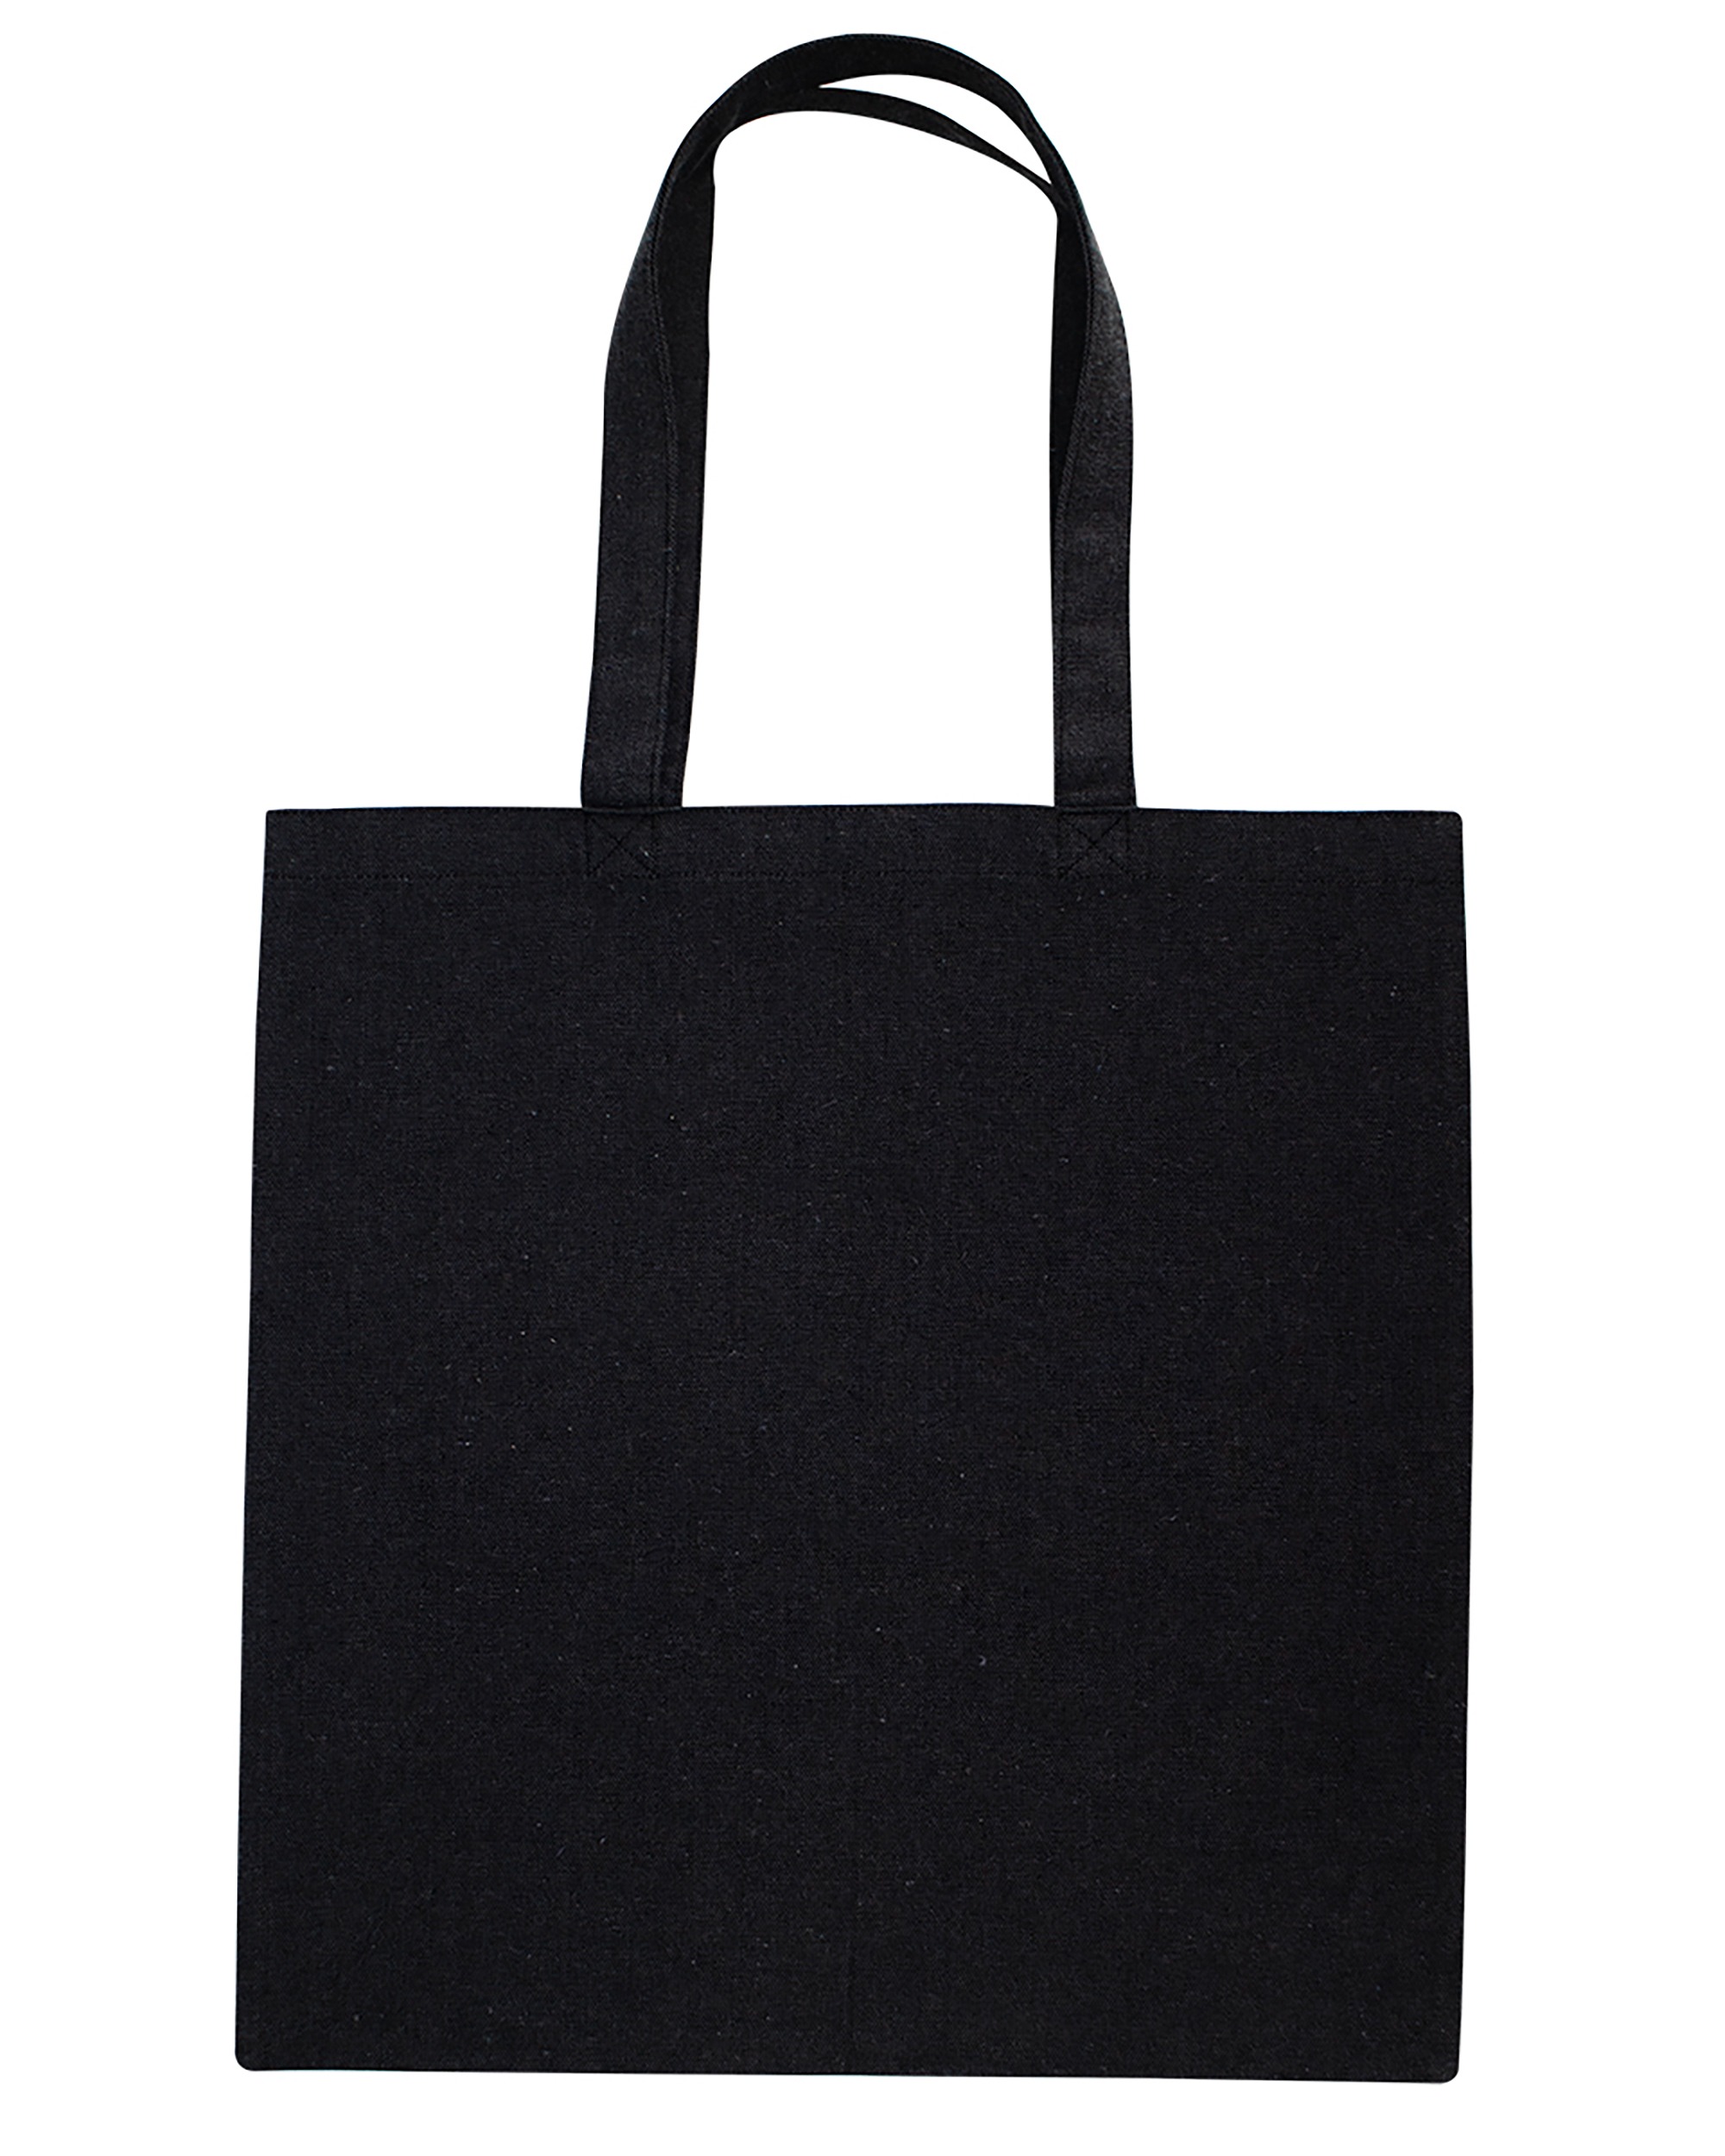 OAD® OAD113R Midweight Recycled Canvas Tote Bag